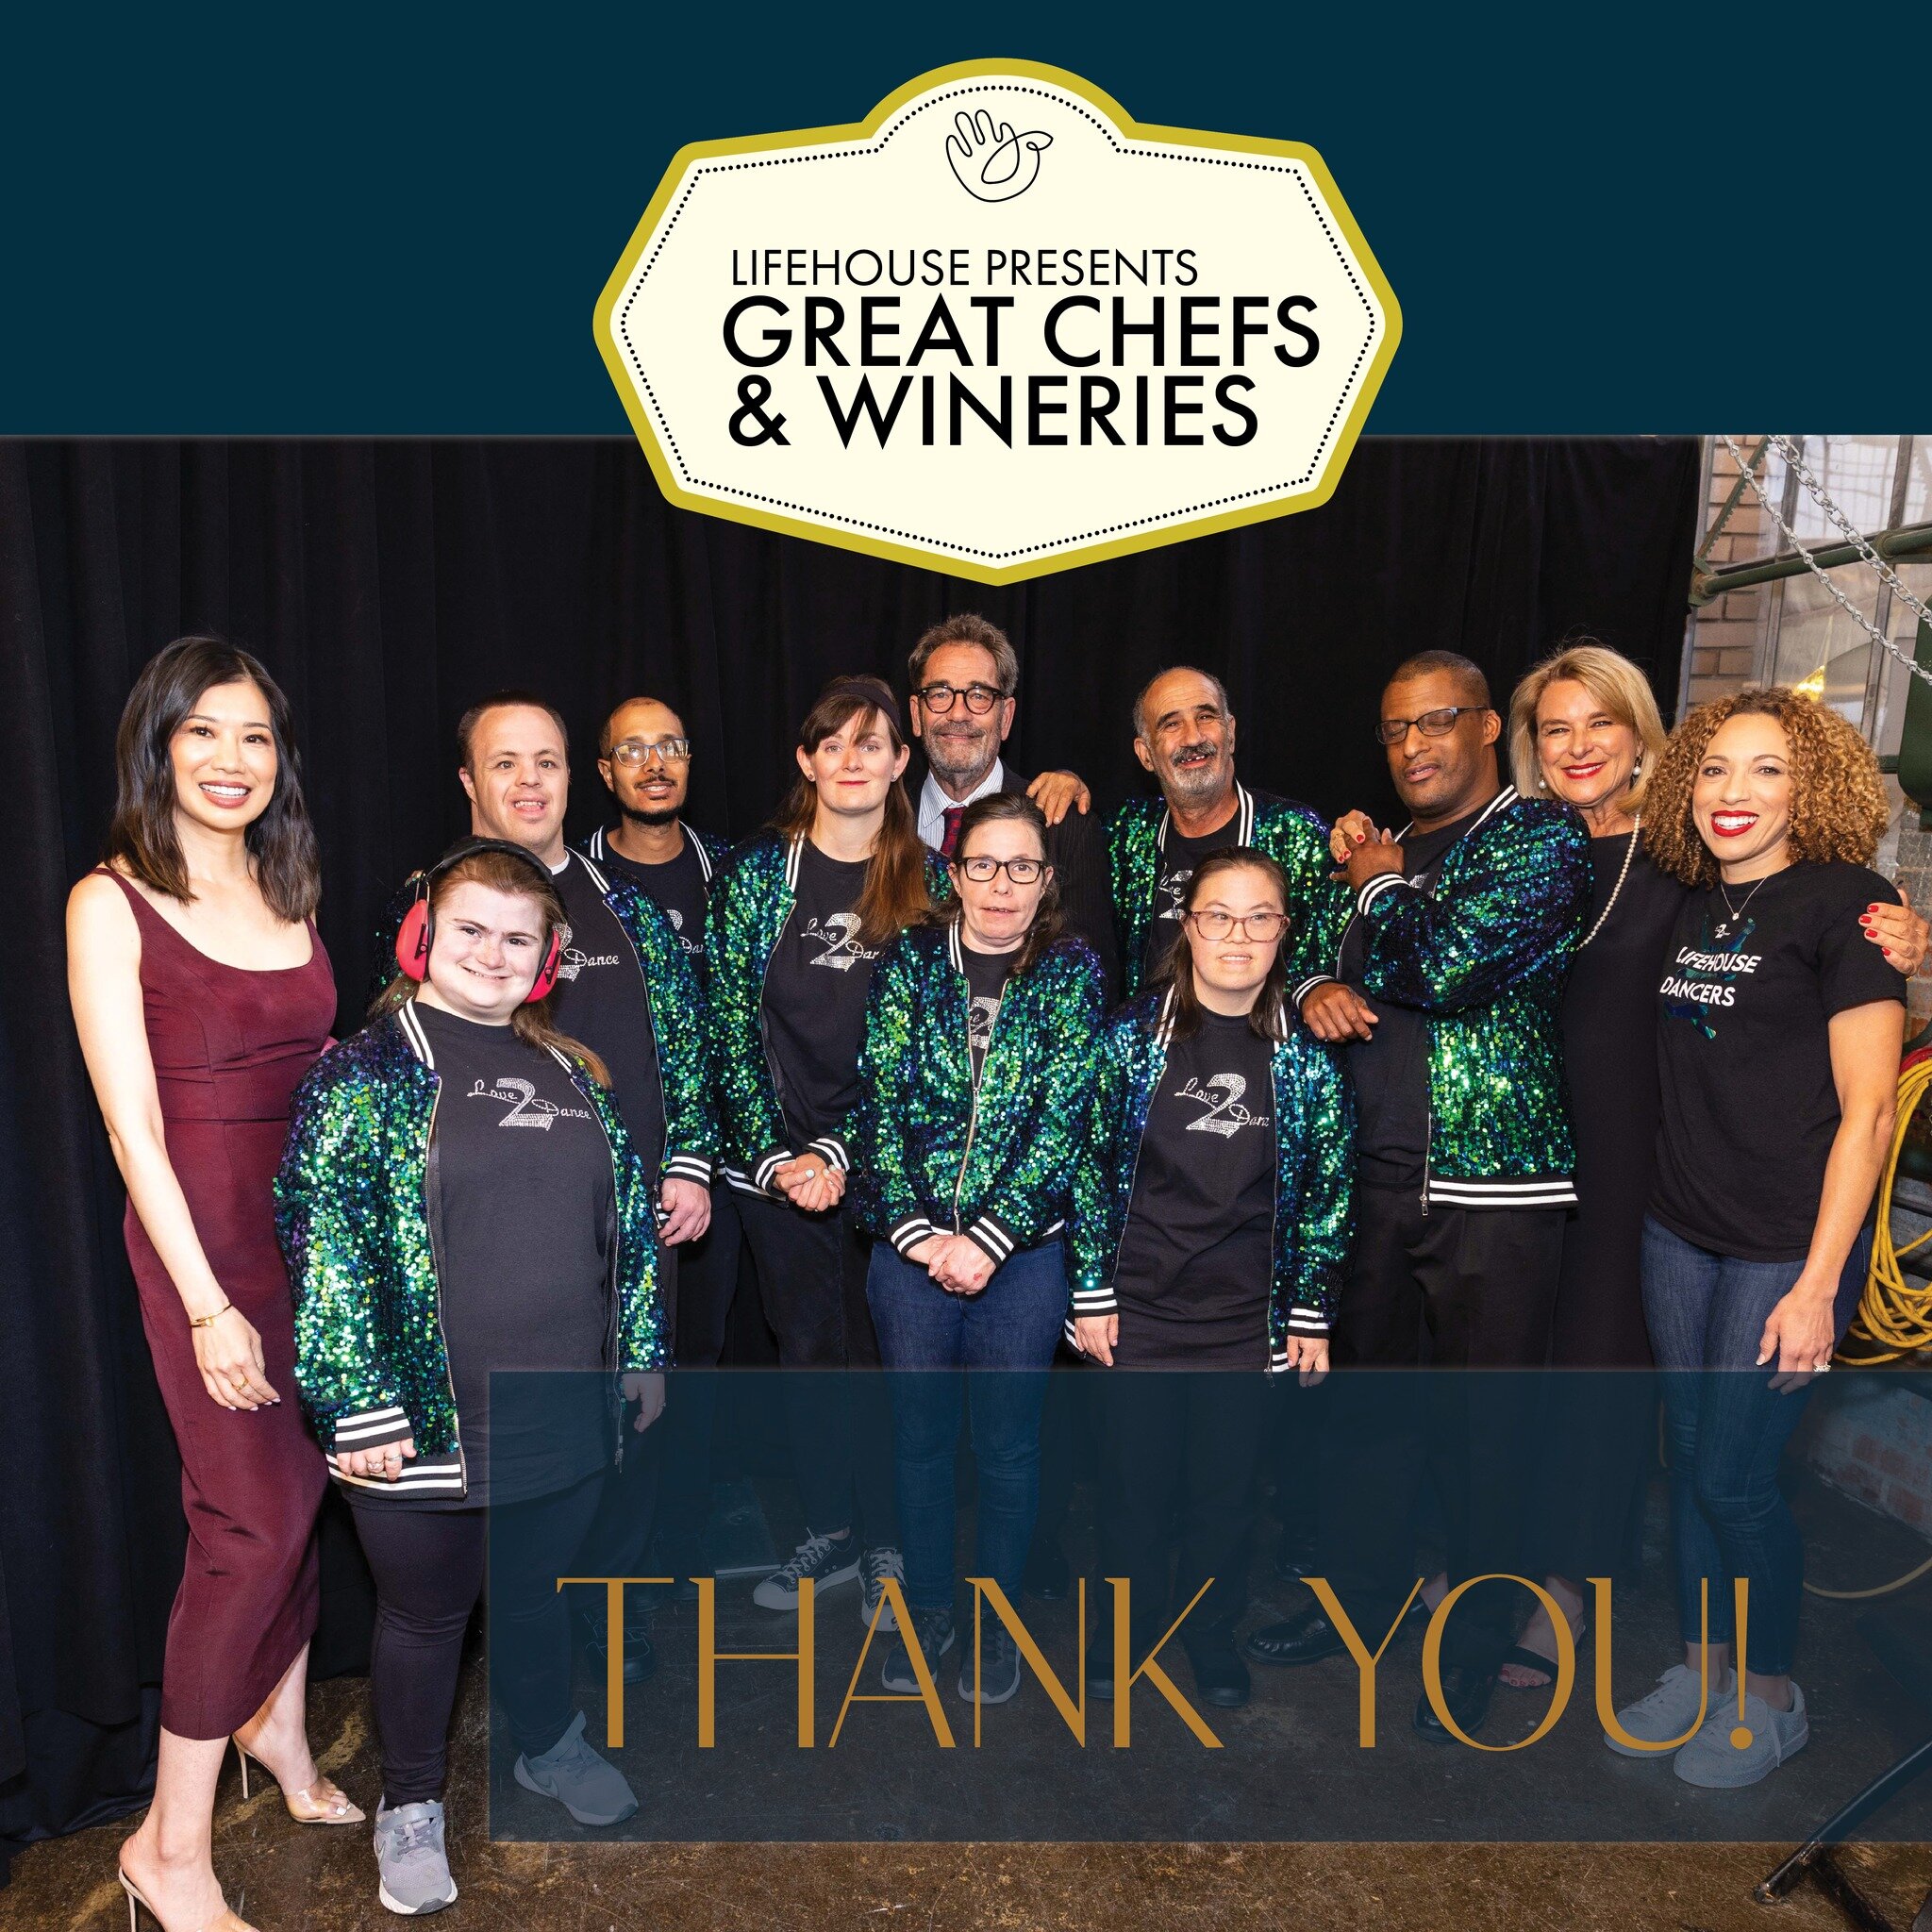 #GREATCHEFSANDWINERIES2023 :: Lifehouse was delighted to collaborate with world class chefs, wineries and local businesses to create an evening to be remembered for Great Chefs and Wineries this year. We are filled with so much gratitude for this ama